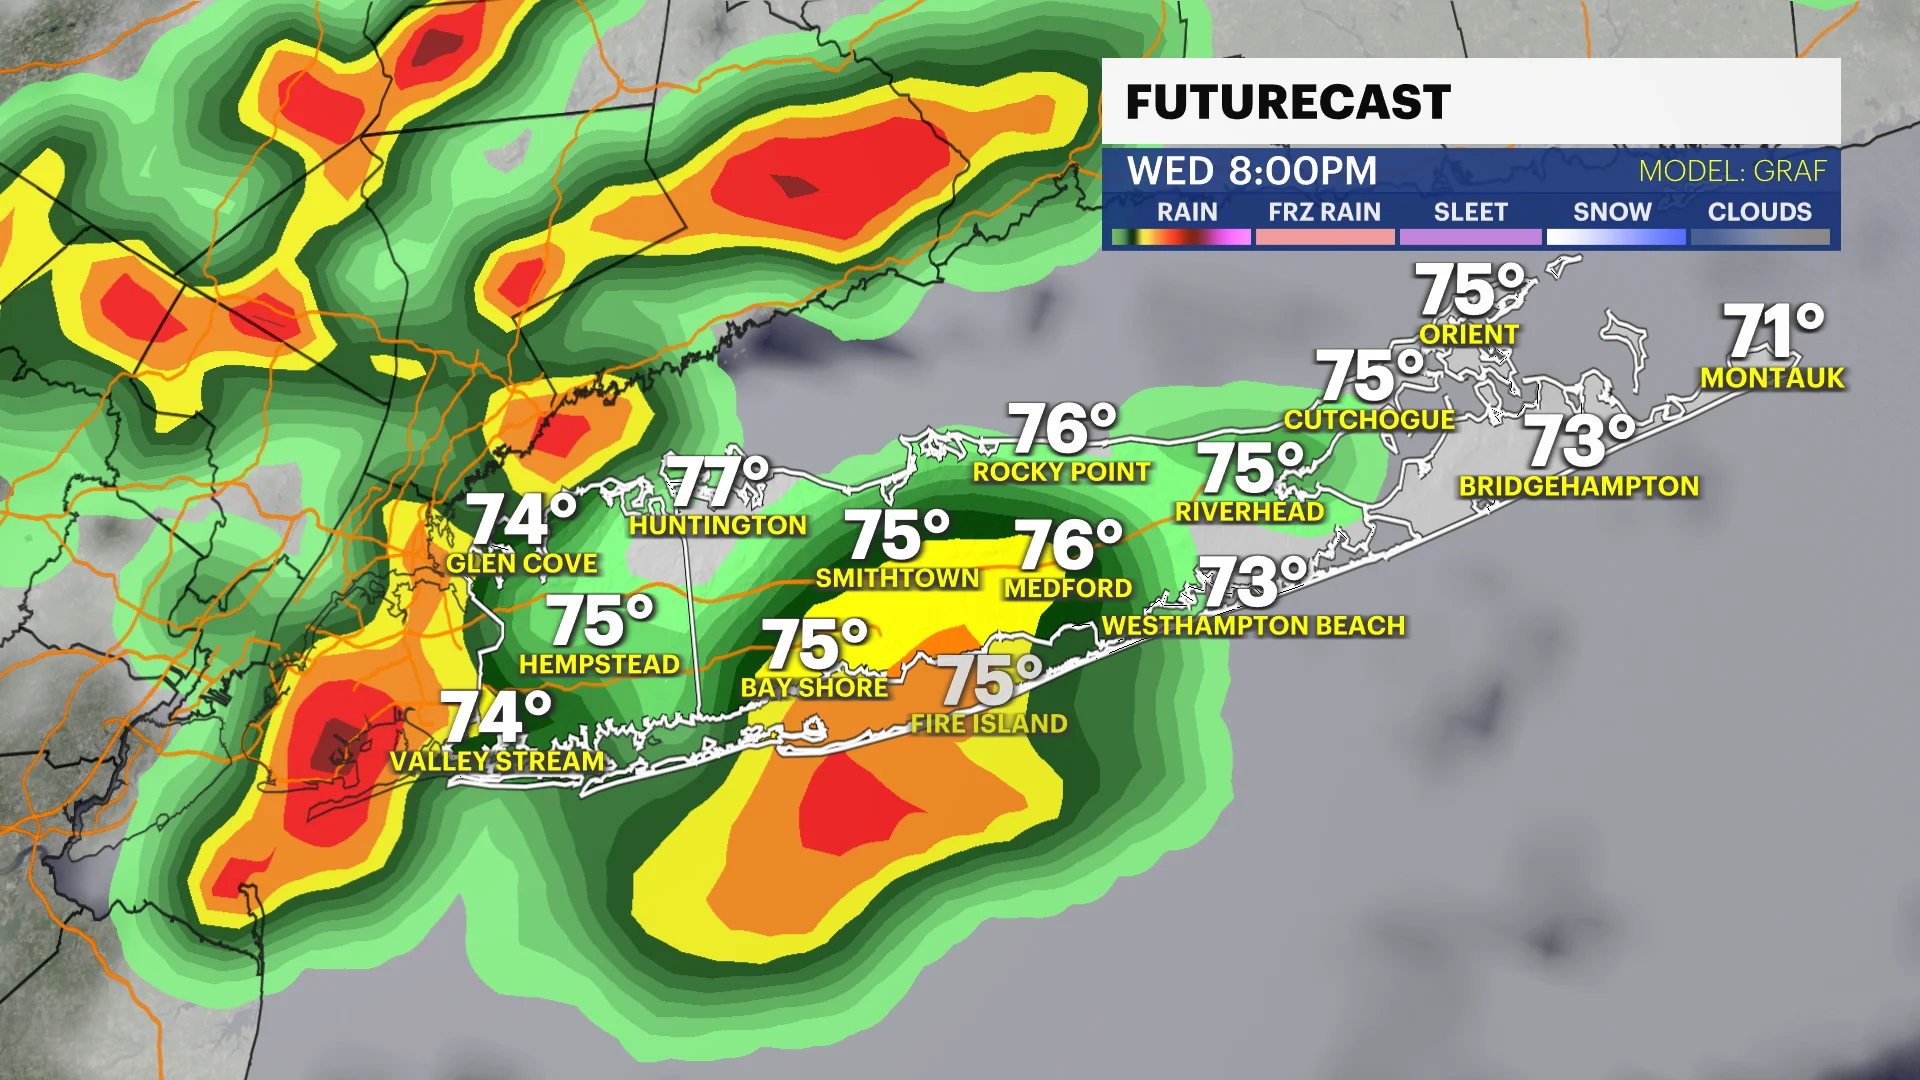 Humidity on the rise with storms on tap for late Wednesday